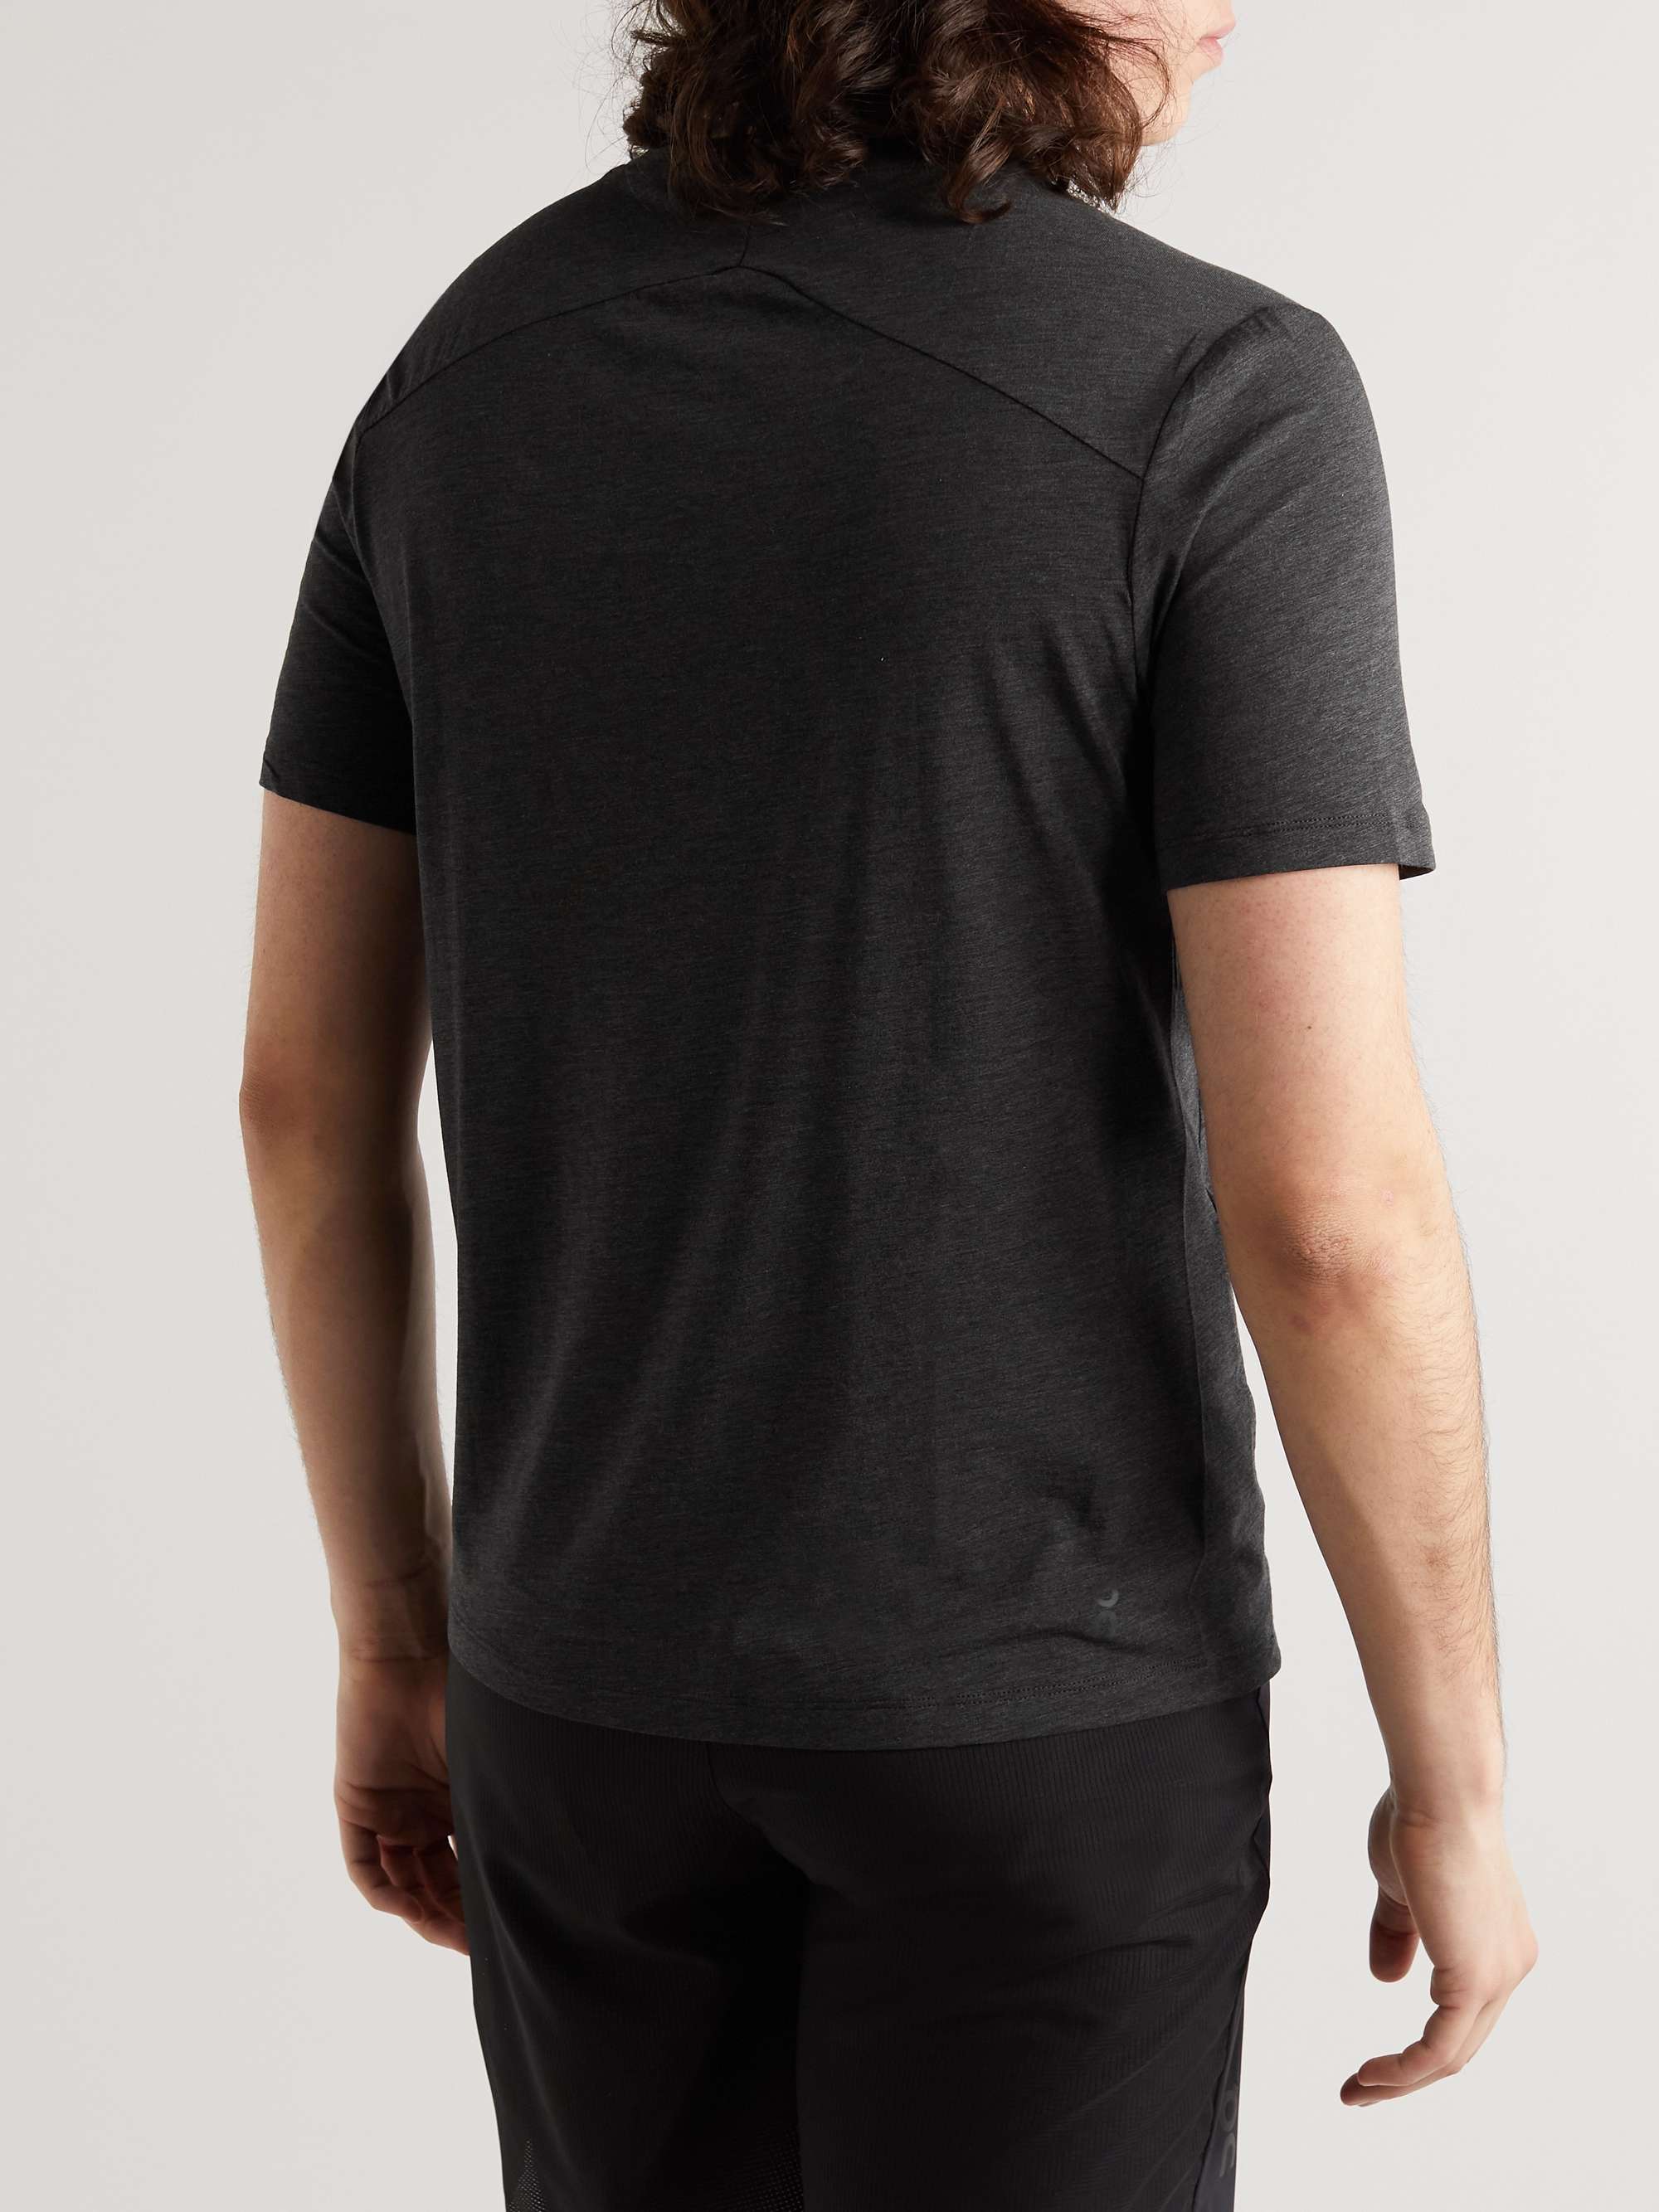 ON Active-T Stretch Cotton-Blend Jersey T-Shirt